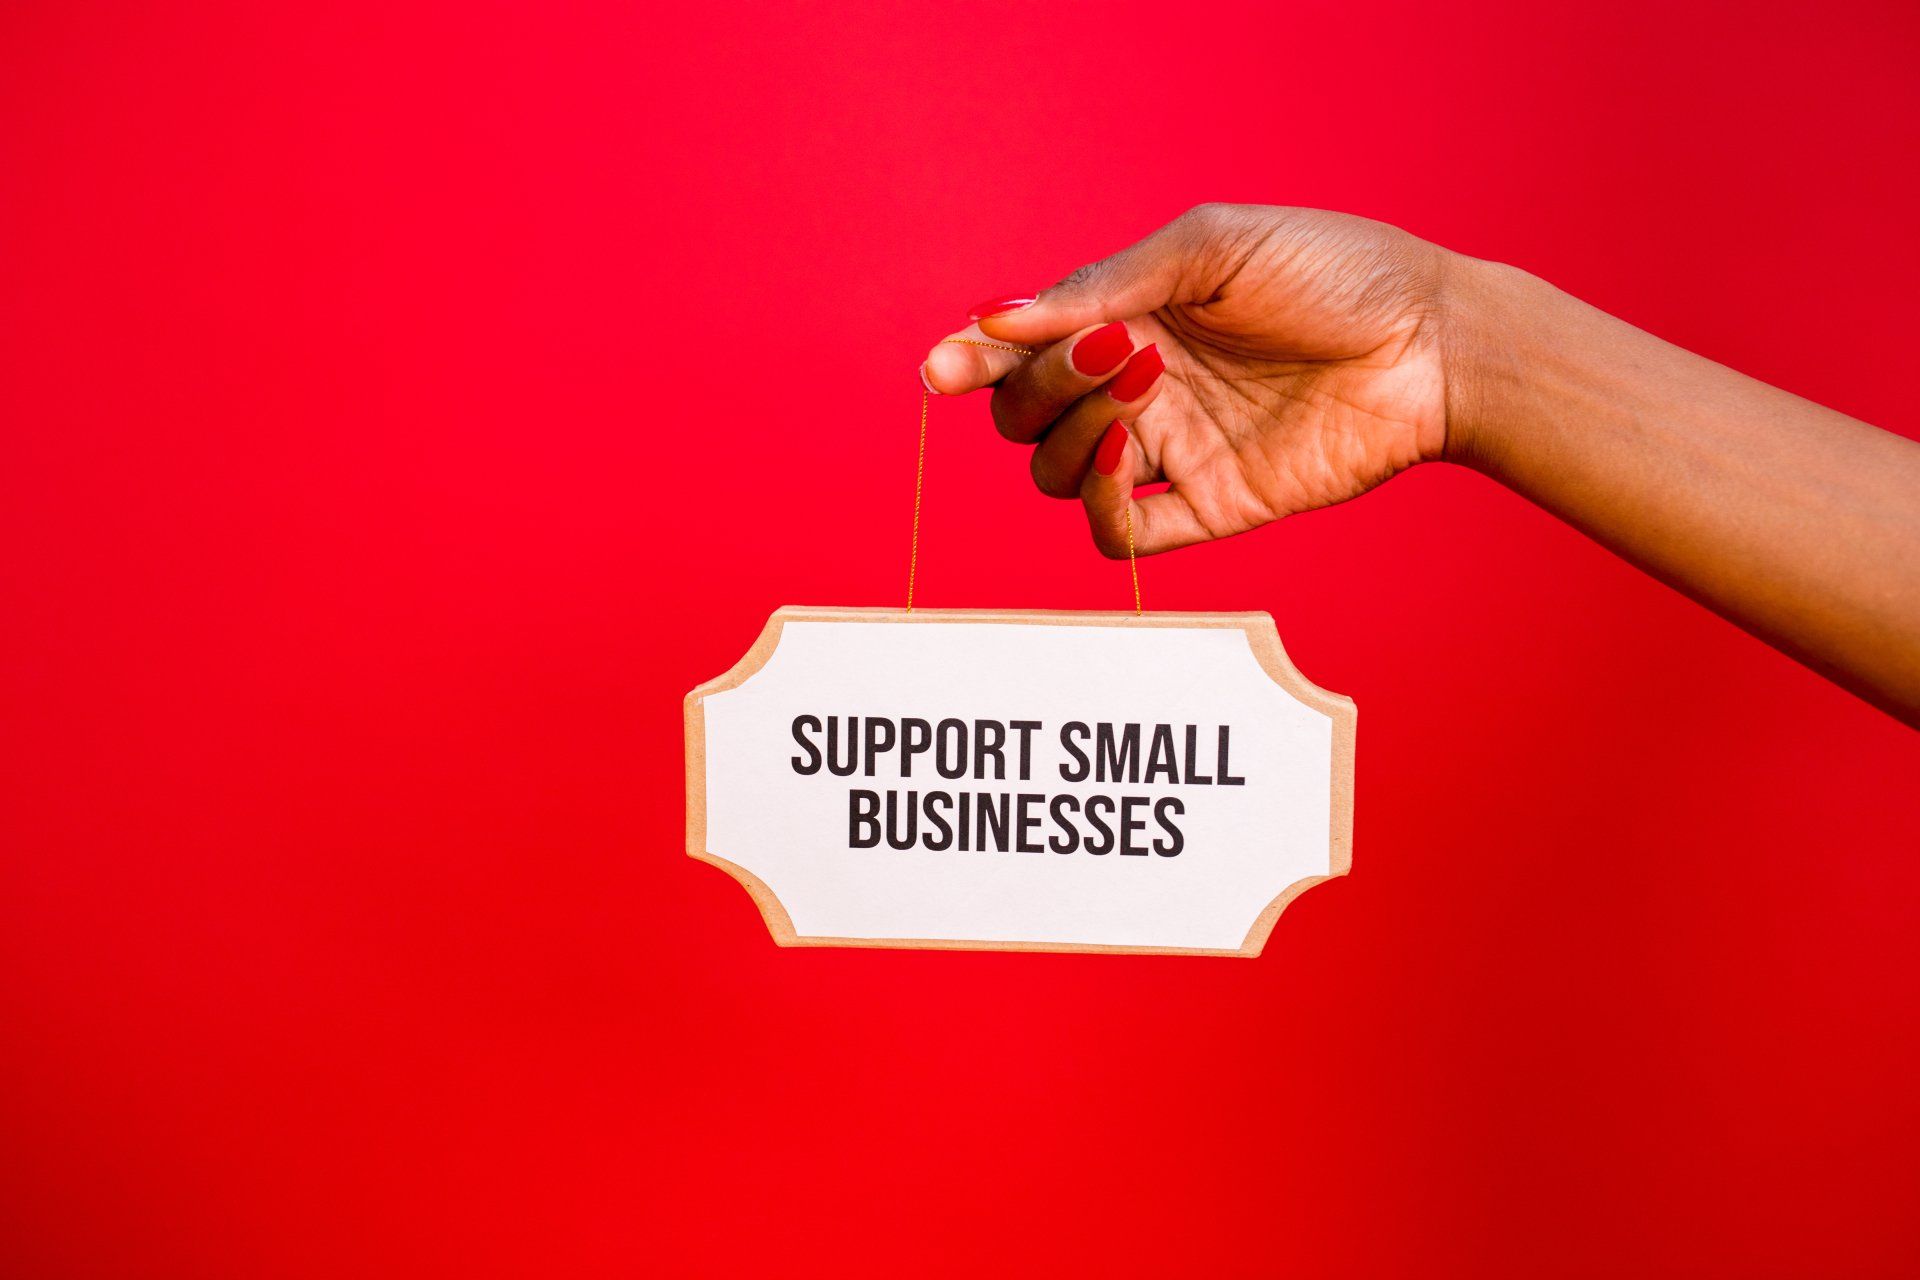 A woman 's hand is holding a sign that says 'support small businesses'